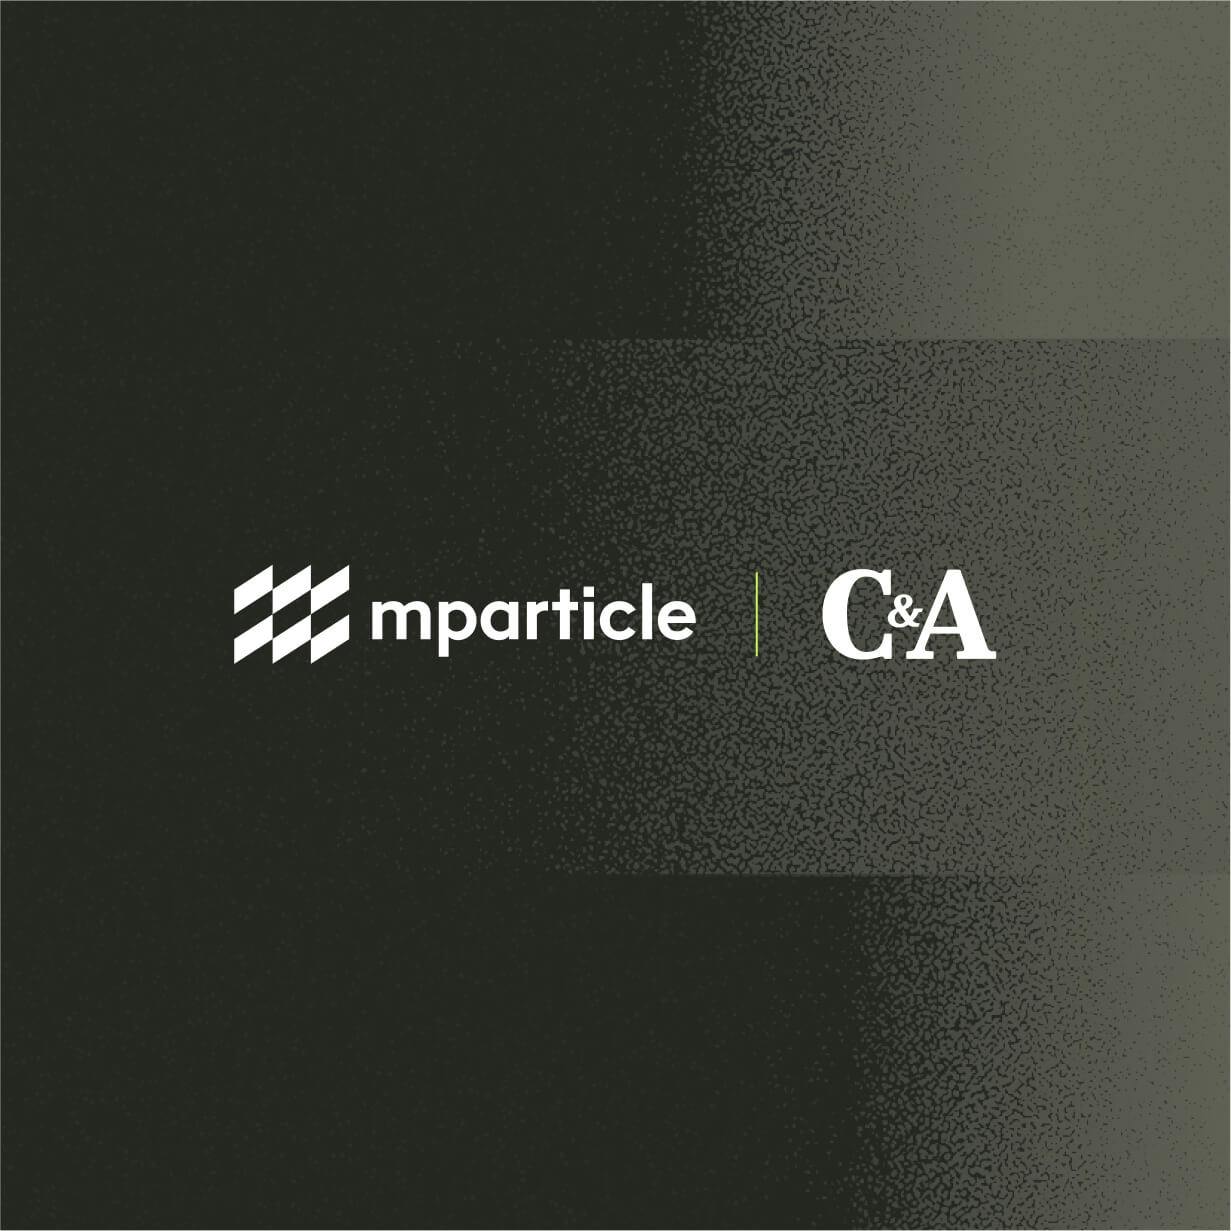 C&A adopts mParticle Customer Data Platform to power omnichannel customer experience